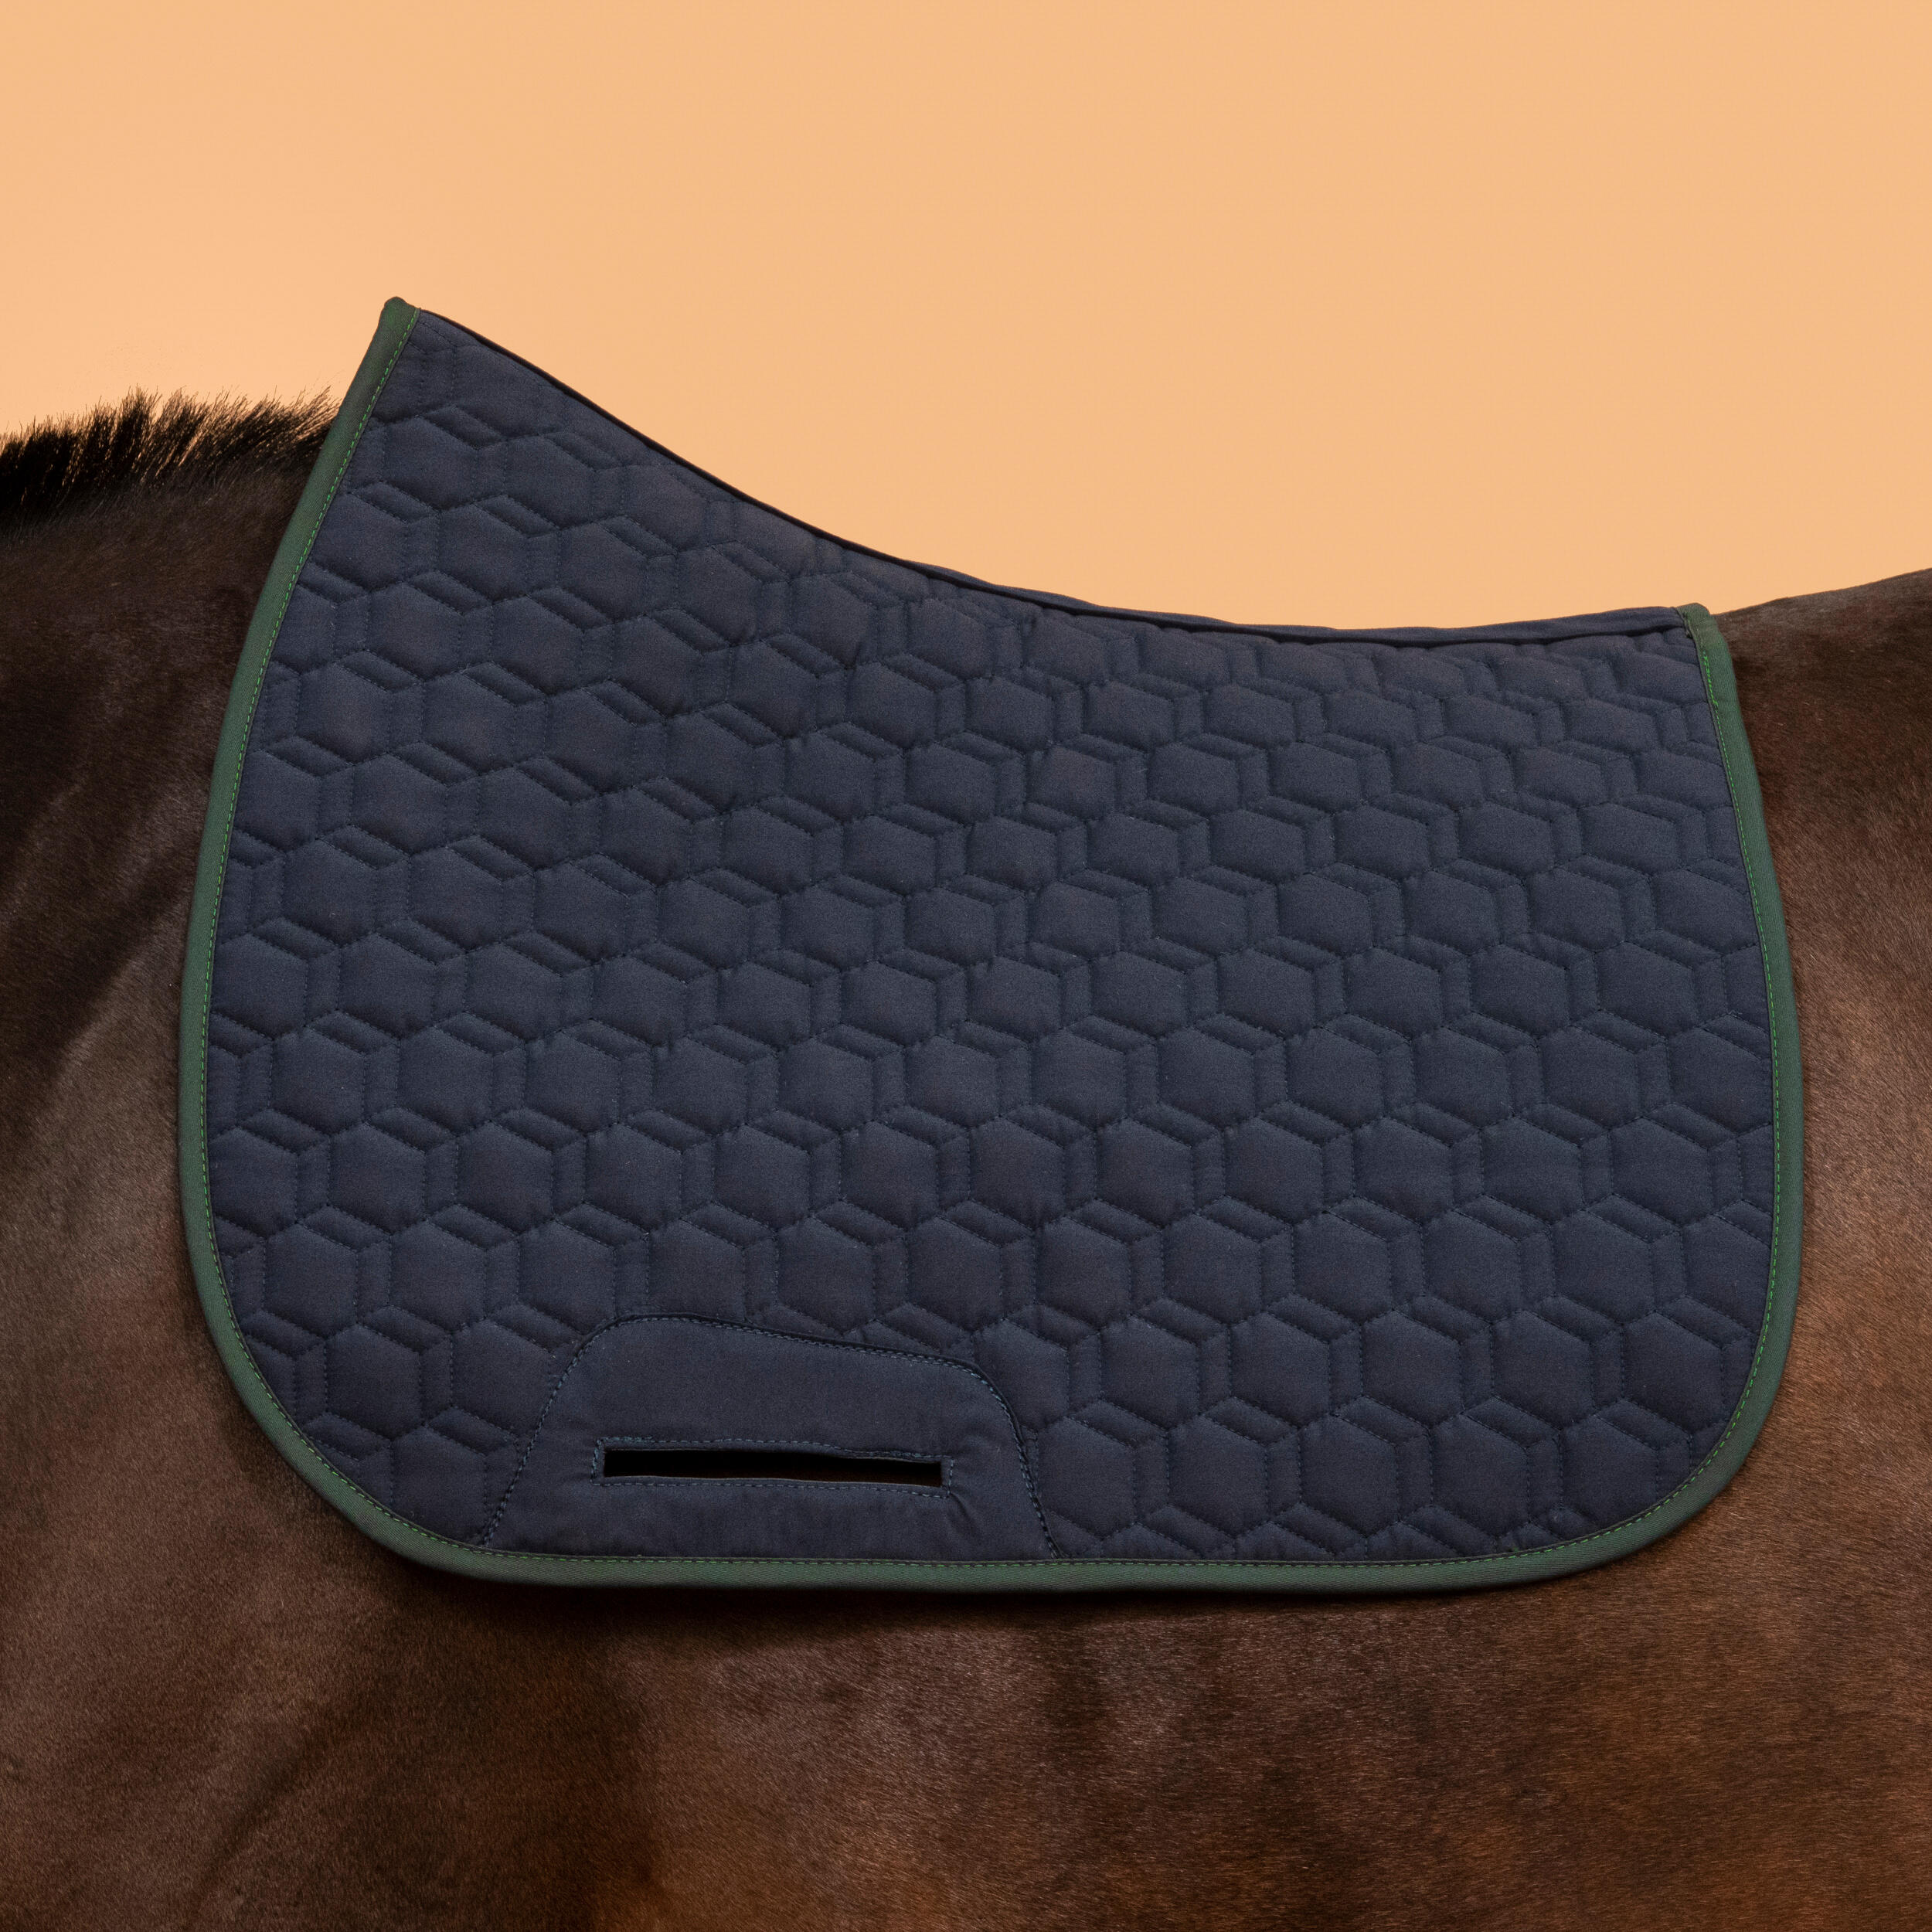 Horse Riding Reversible Saddle Cloth For Horse and Pony 500 - Navy/Green 4/9